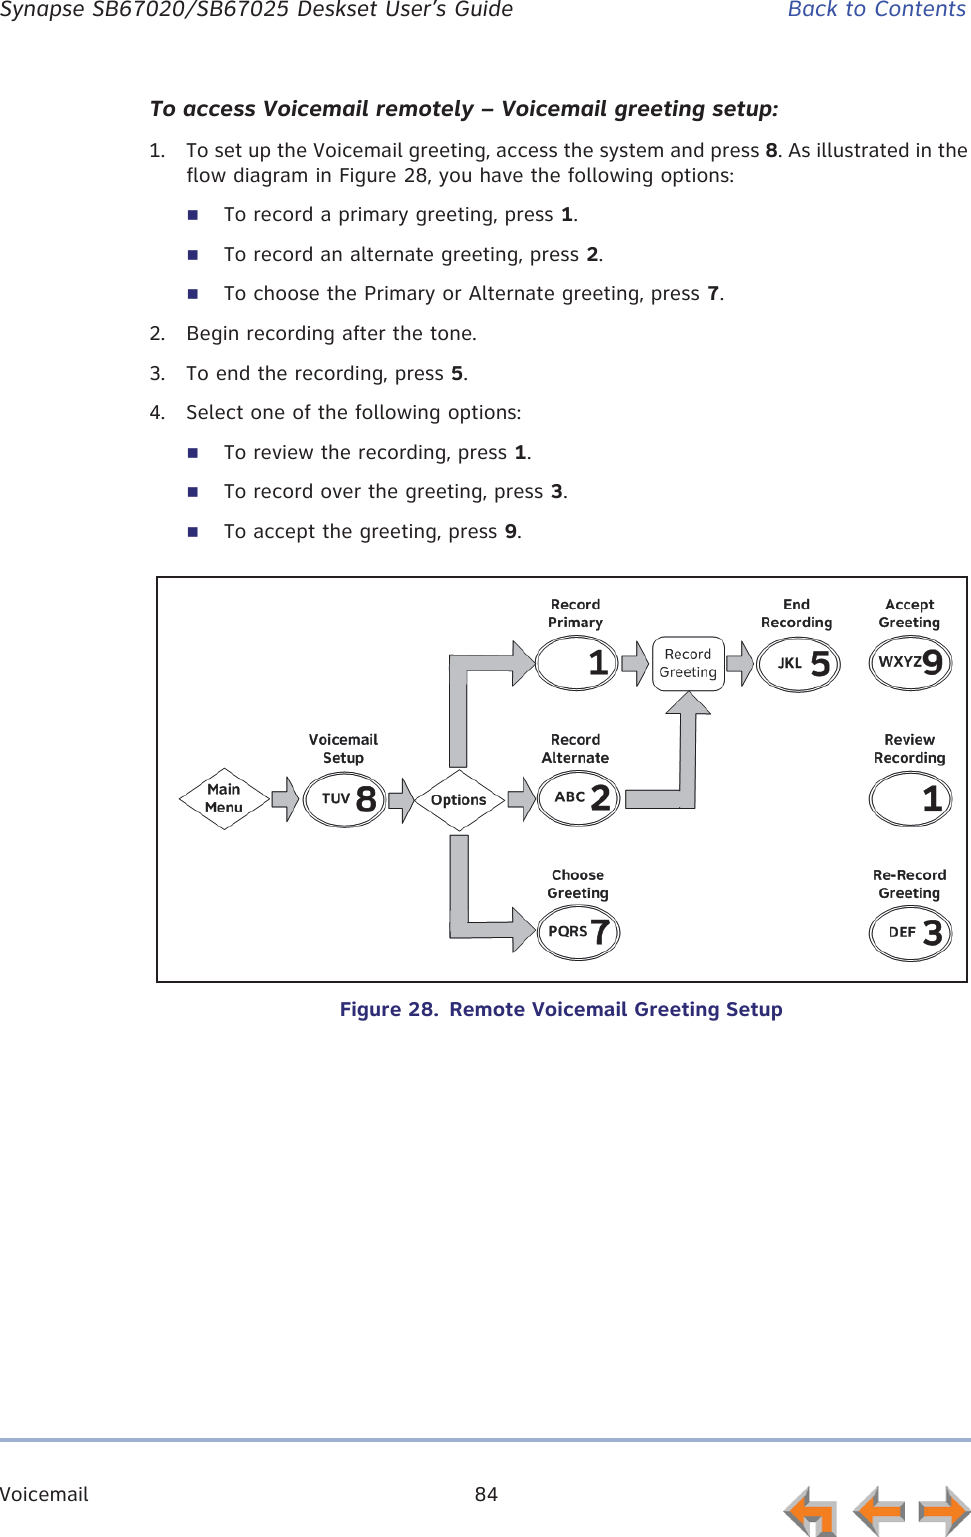 Voicemail 84      Synapse SB67020/SB67025 Deskset User’s Guide Back to ContentsTo access Voicemail remotely – Voicemail greeting setup:1. To set up the Voicemail greeting, access the system and press 8. As illustrated in the flow diagram in Figure 28, you have the following options:To record a primary greeting, press 1.To record an alternate greeting, press 2.To choose the Primary or Alternate greeting, press 7.2. Begin recording after the tone.3. To end the recording, press 5.4. Select one of the following options:To review the recording, press 1.To record over the greeting, press 3.To accept the greeting, press 9.Figure 28.  Remote Voicemail Greeting Setup